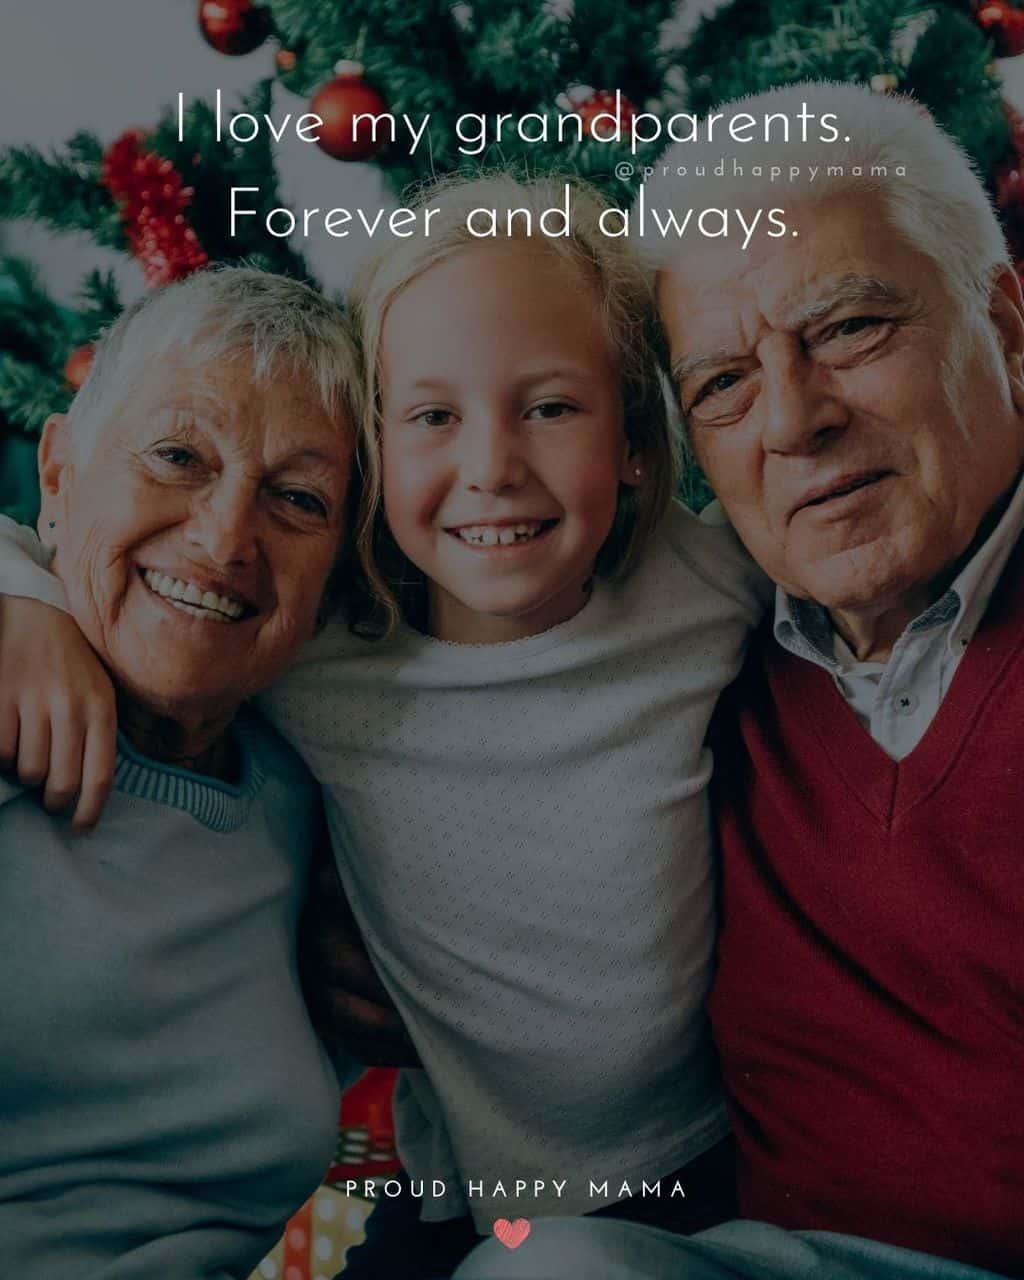 Grandparent Quotes – I love my grandparents. Forever and always.’